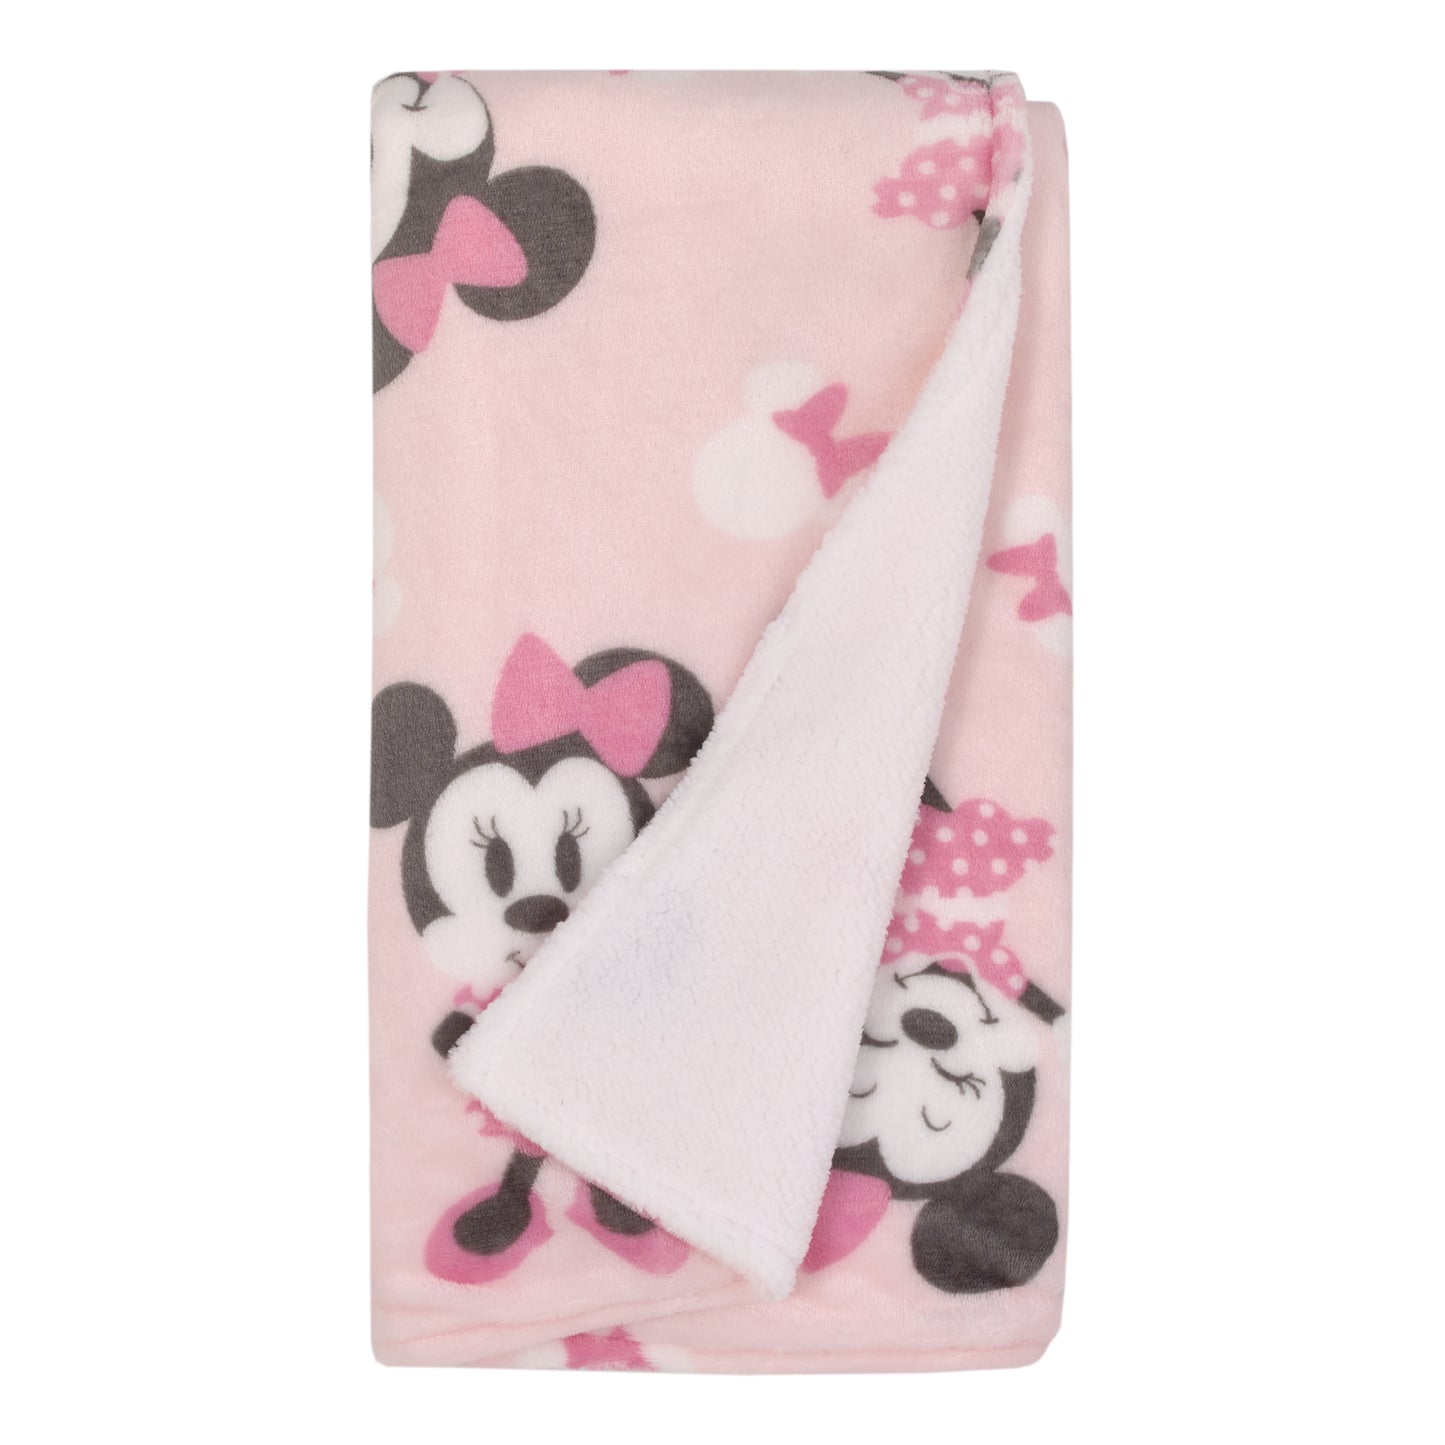 Disney Minnie Mouse Pink, White and Black Bows Super Soft Sherpa Baby Blanket